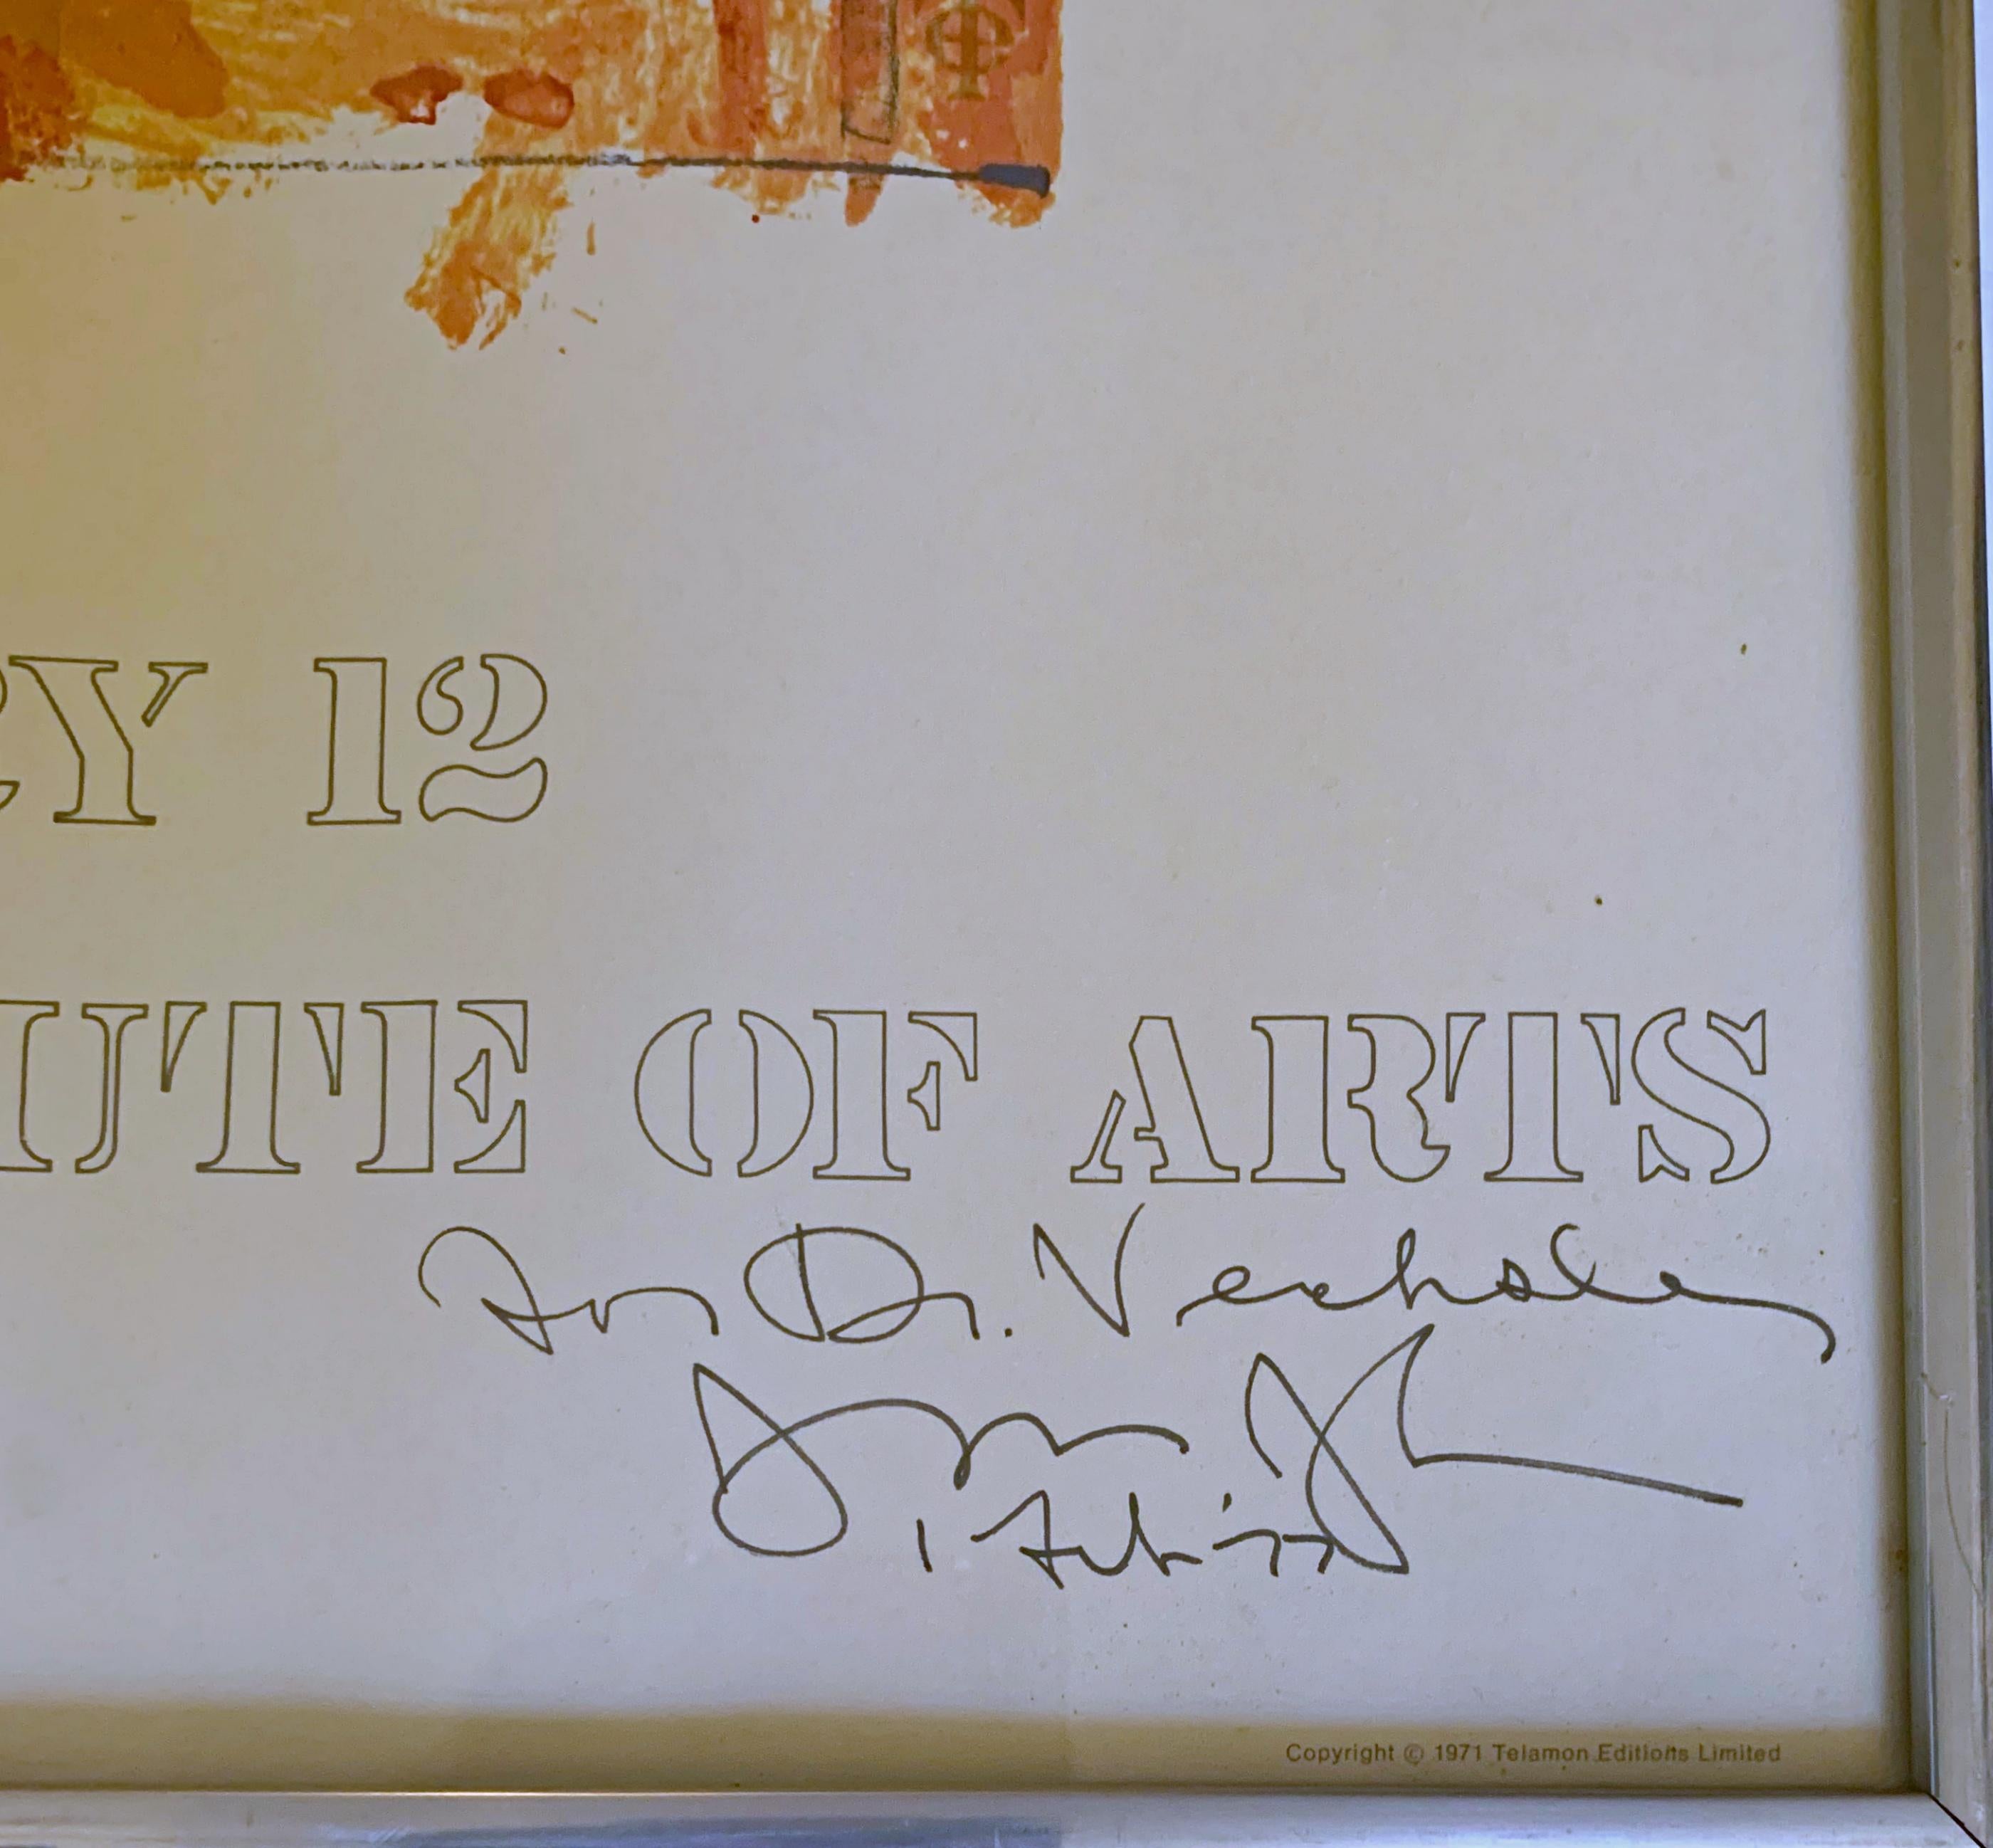 Vintage Poster (Hand Signed and Inscribed) - Print by Jasper Johns